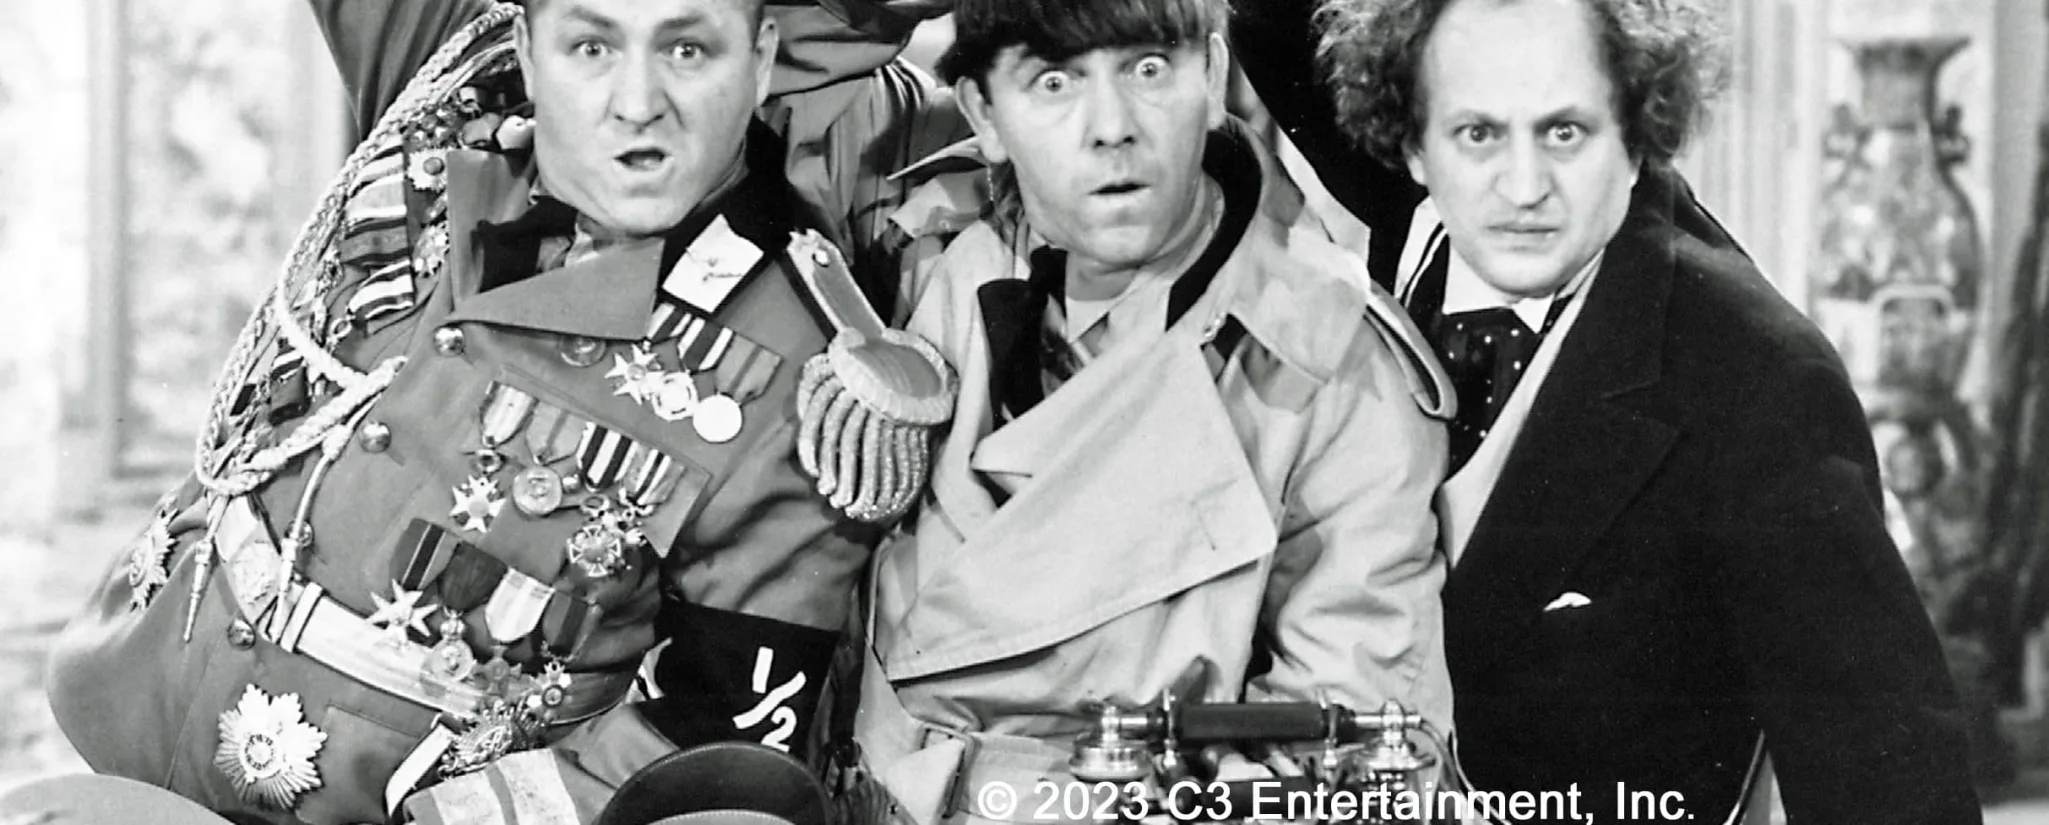 25th Annual Three Stooges Big Screen Event